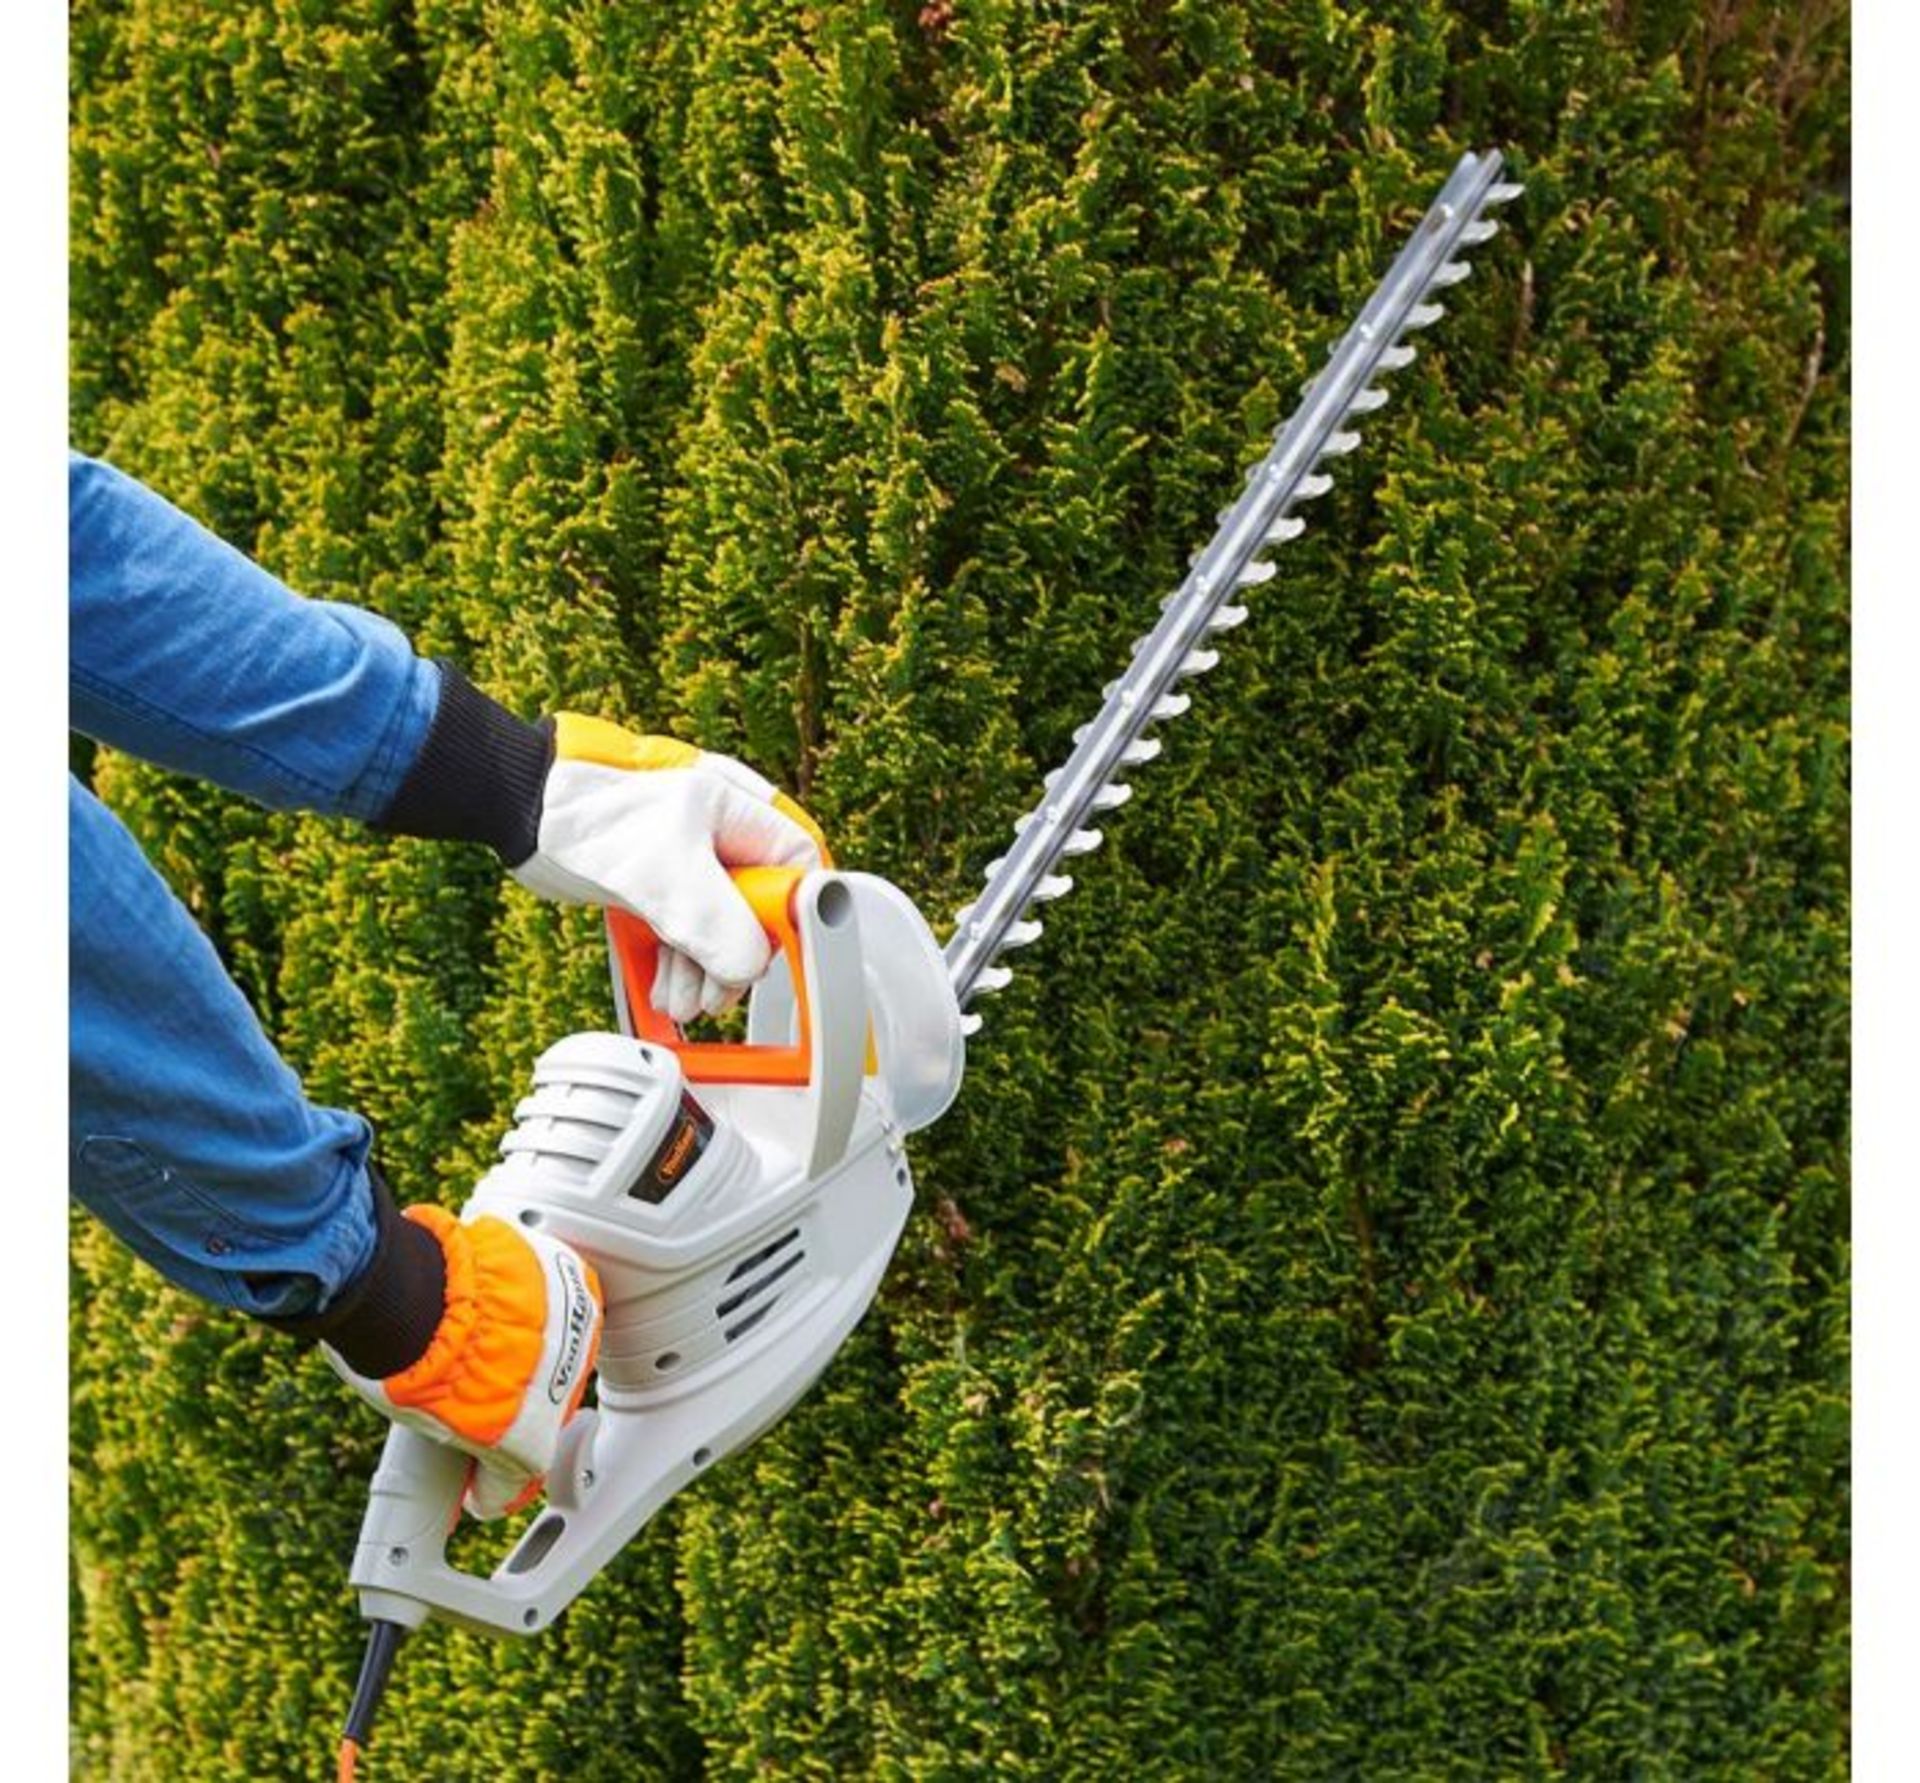 (DD17) 550W Hedge Trimmer Lightweight at only 3.2kg with a powerful 550W motor and precision b... - Image 2 of 2